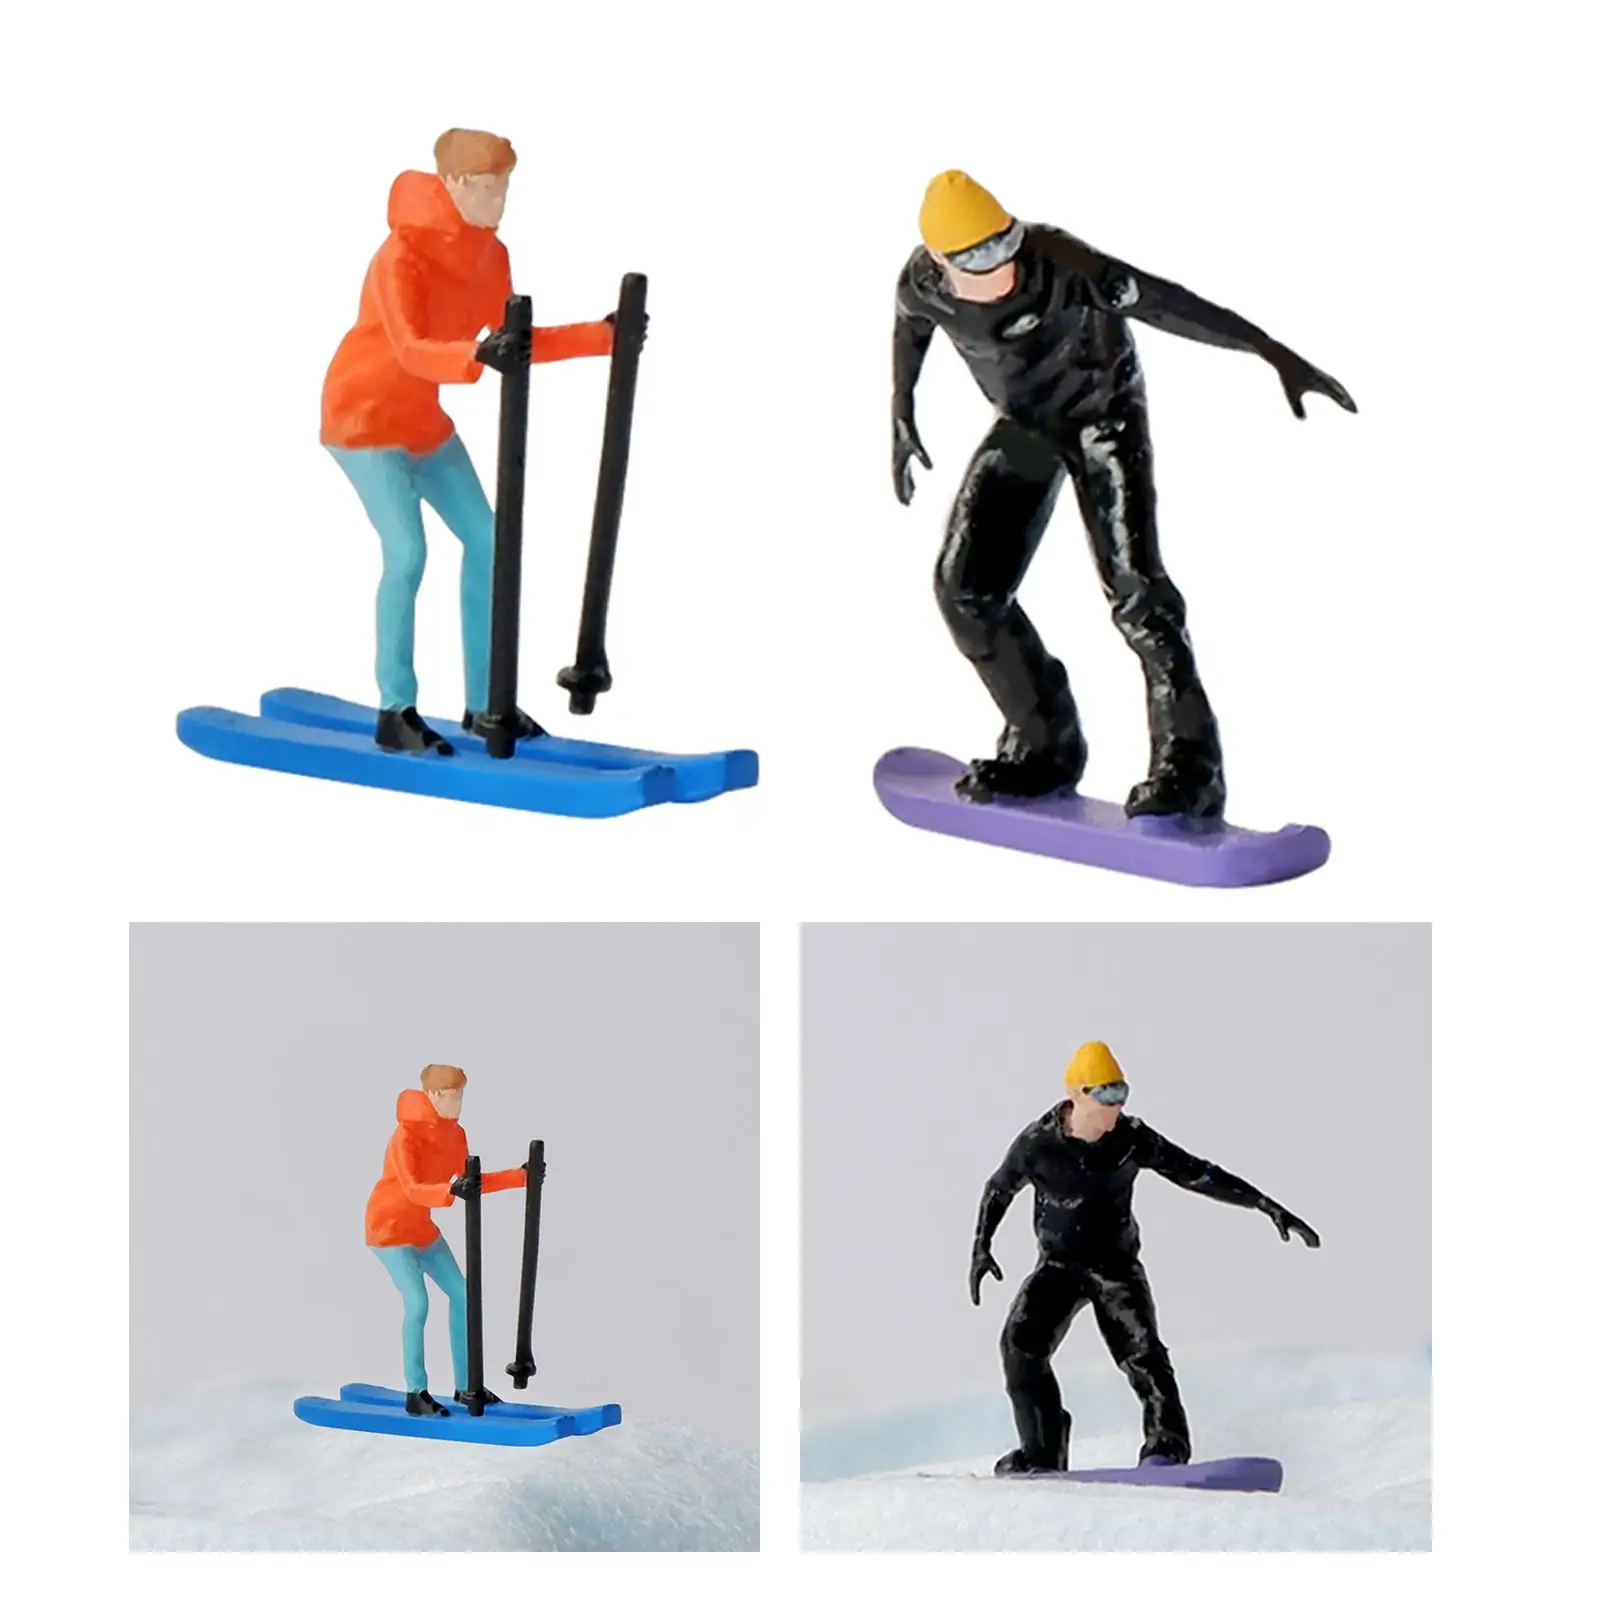 Skiing Model People Figures Simulation Figurines Realistic Figures Ornament for DIY Scene Dollhouse Sand Table Layout Decoration